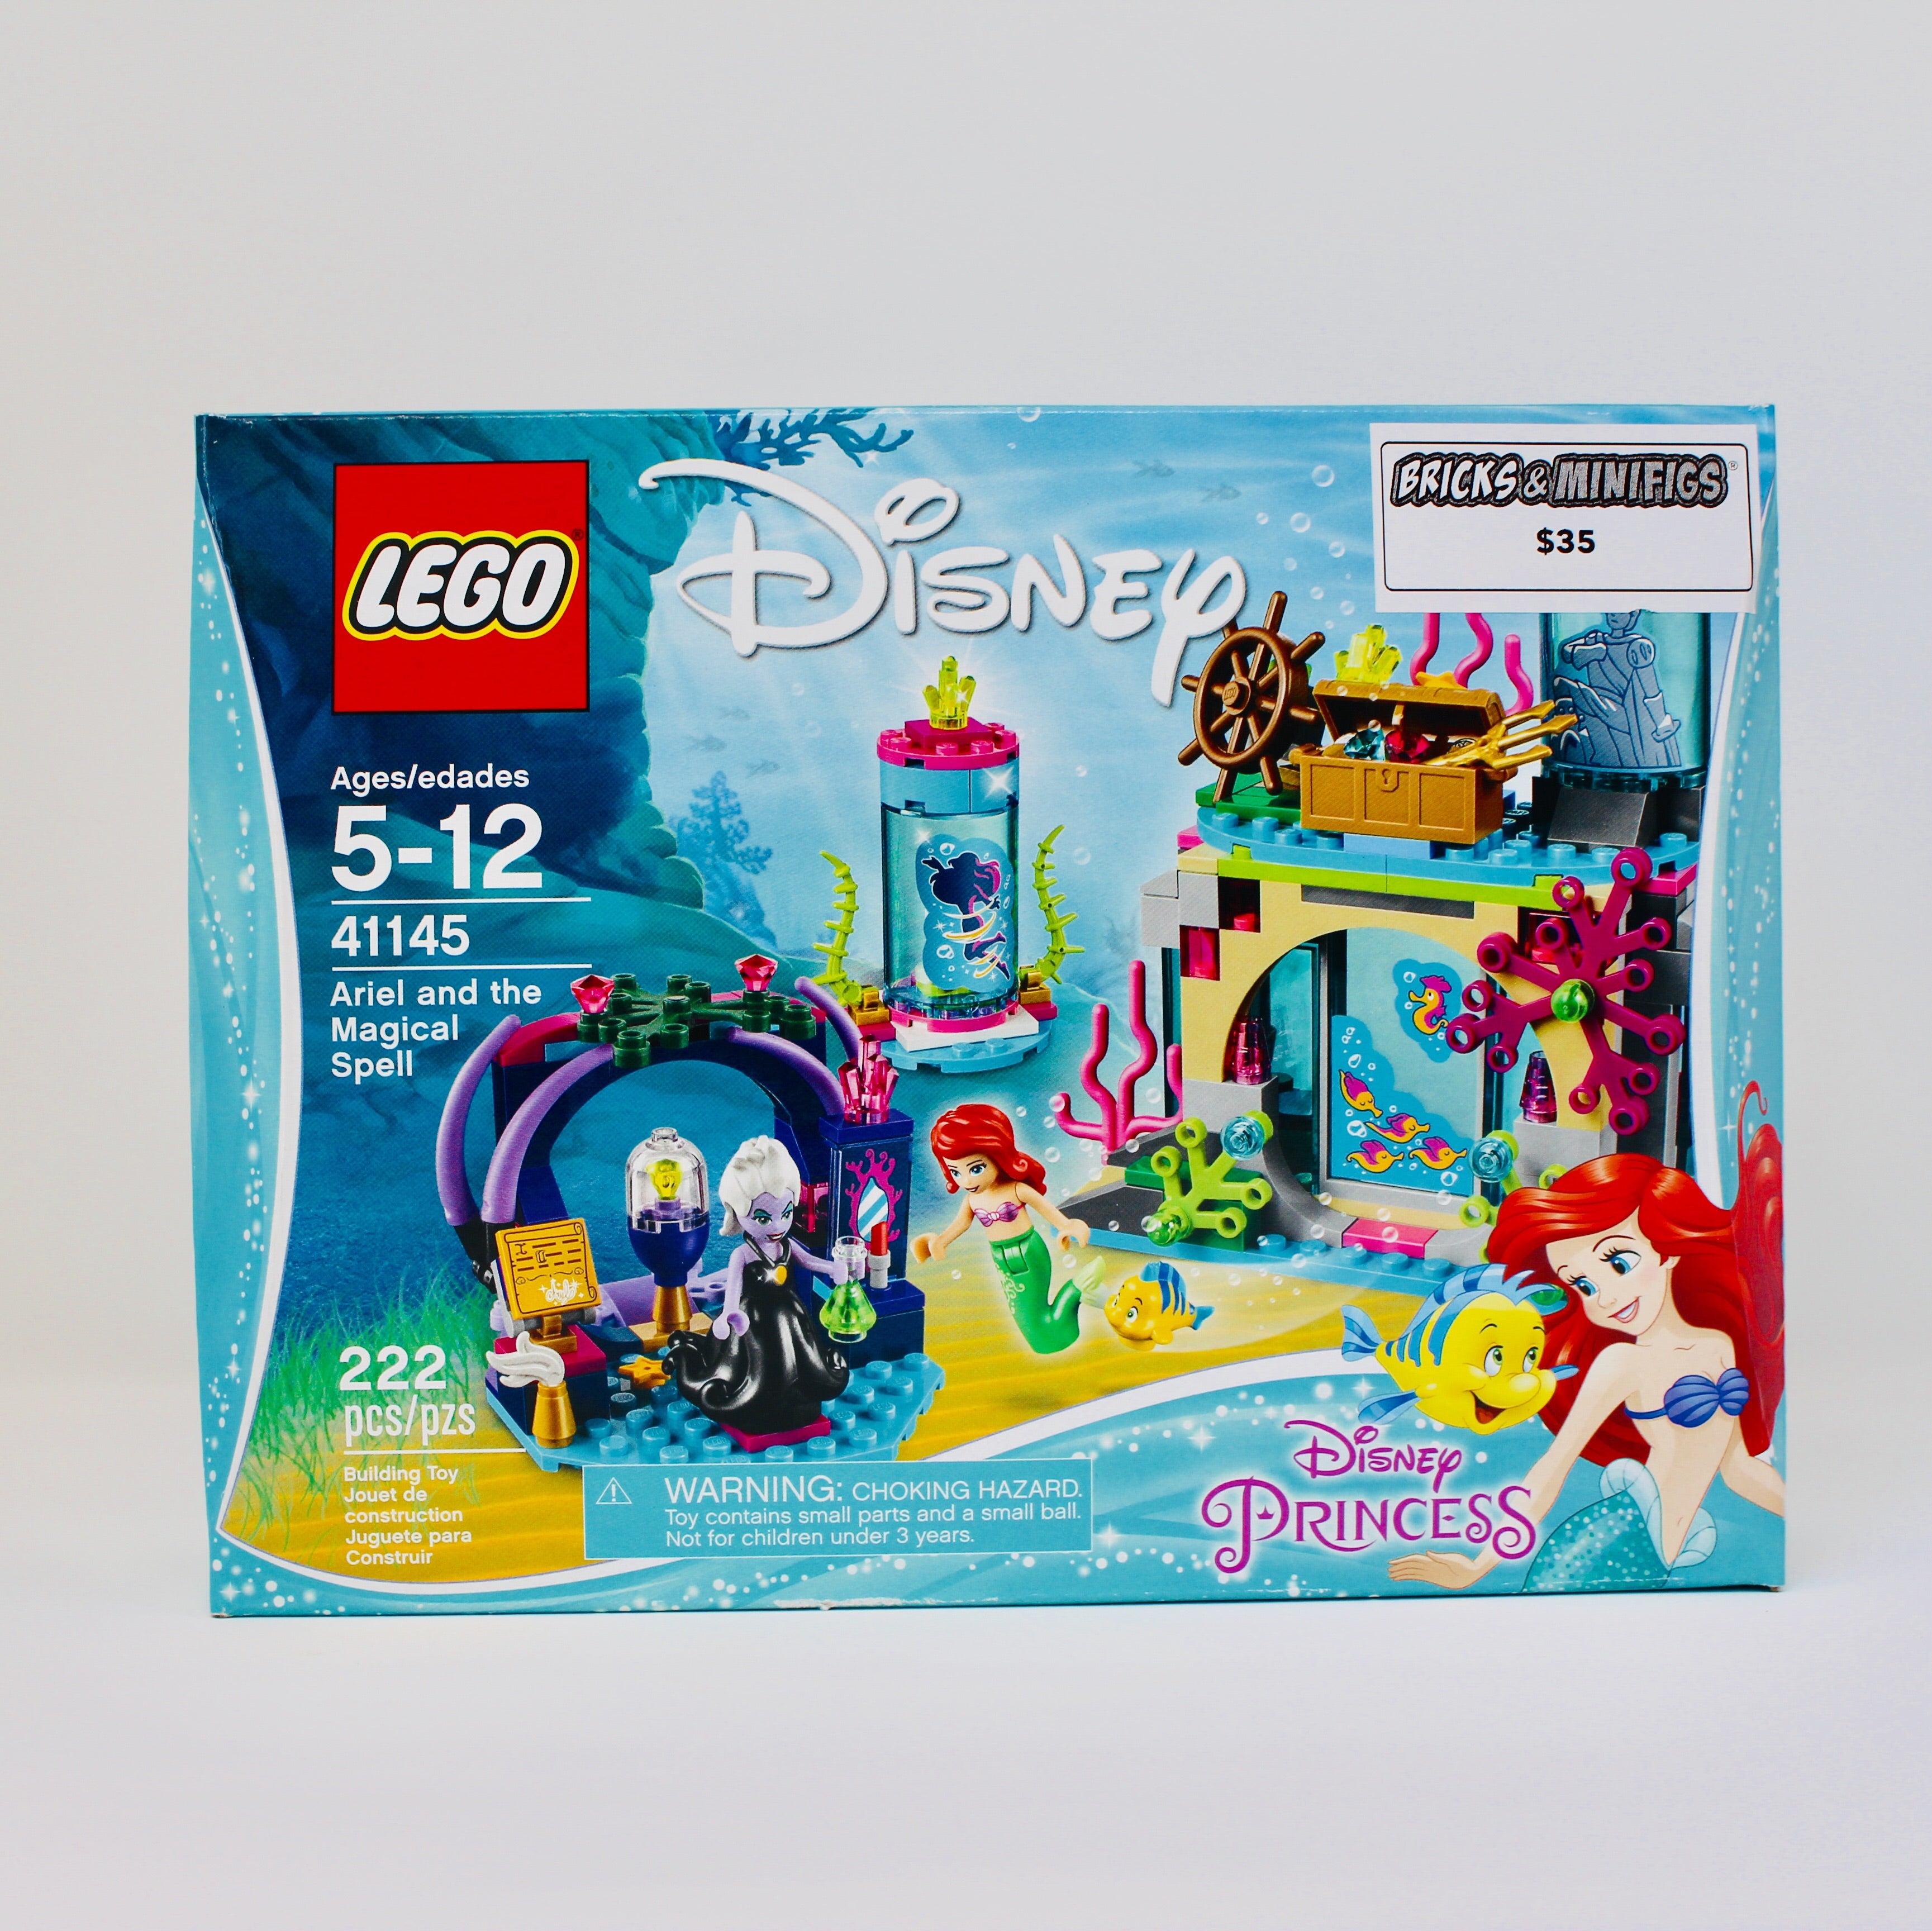 Retired Set 41145 Disney Princess Ariel and the Magic Spell